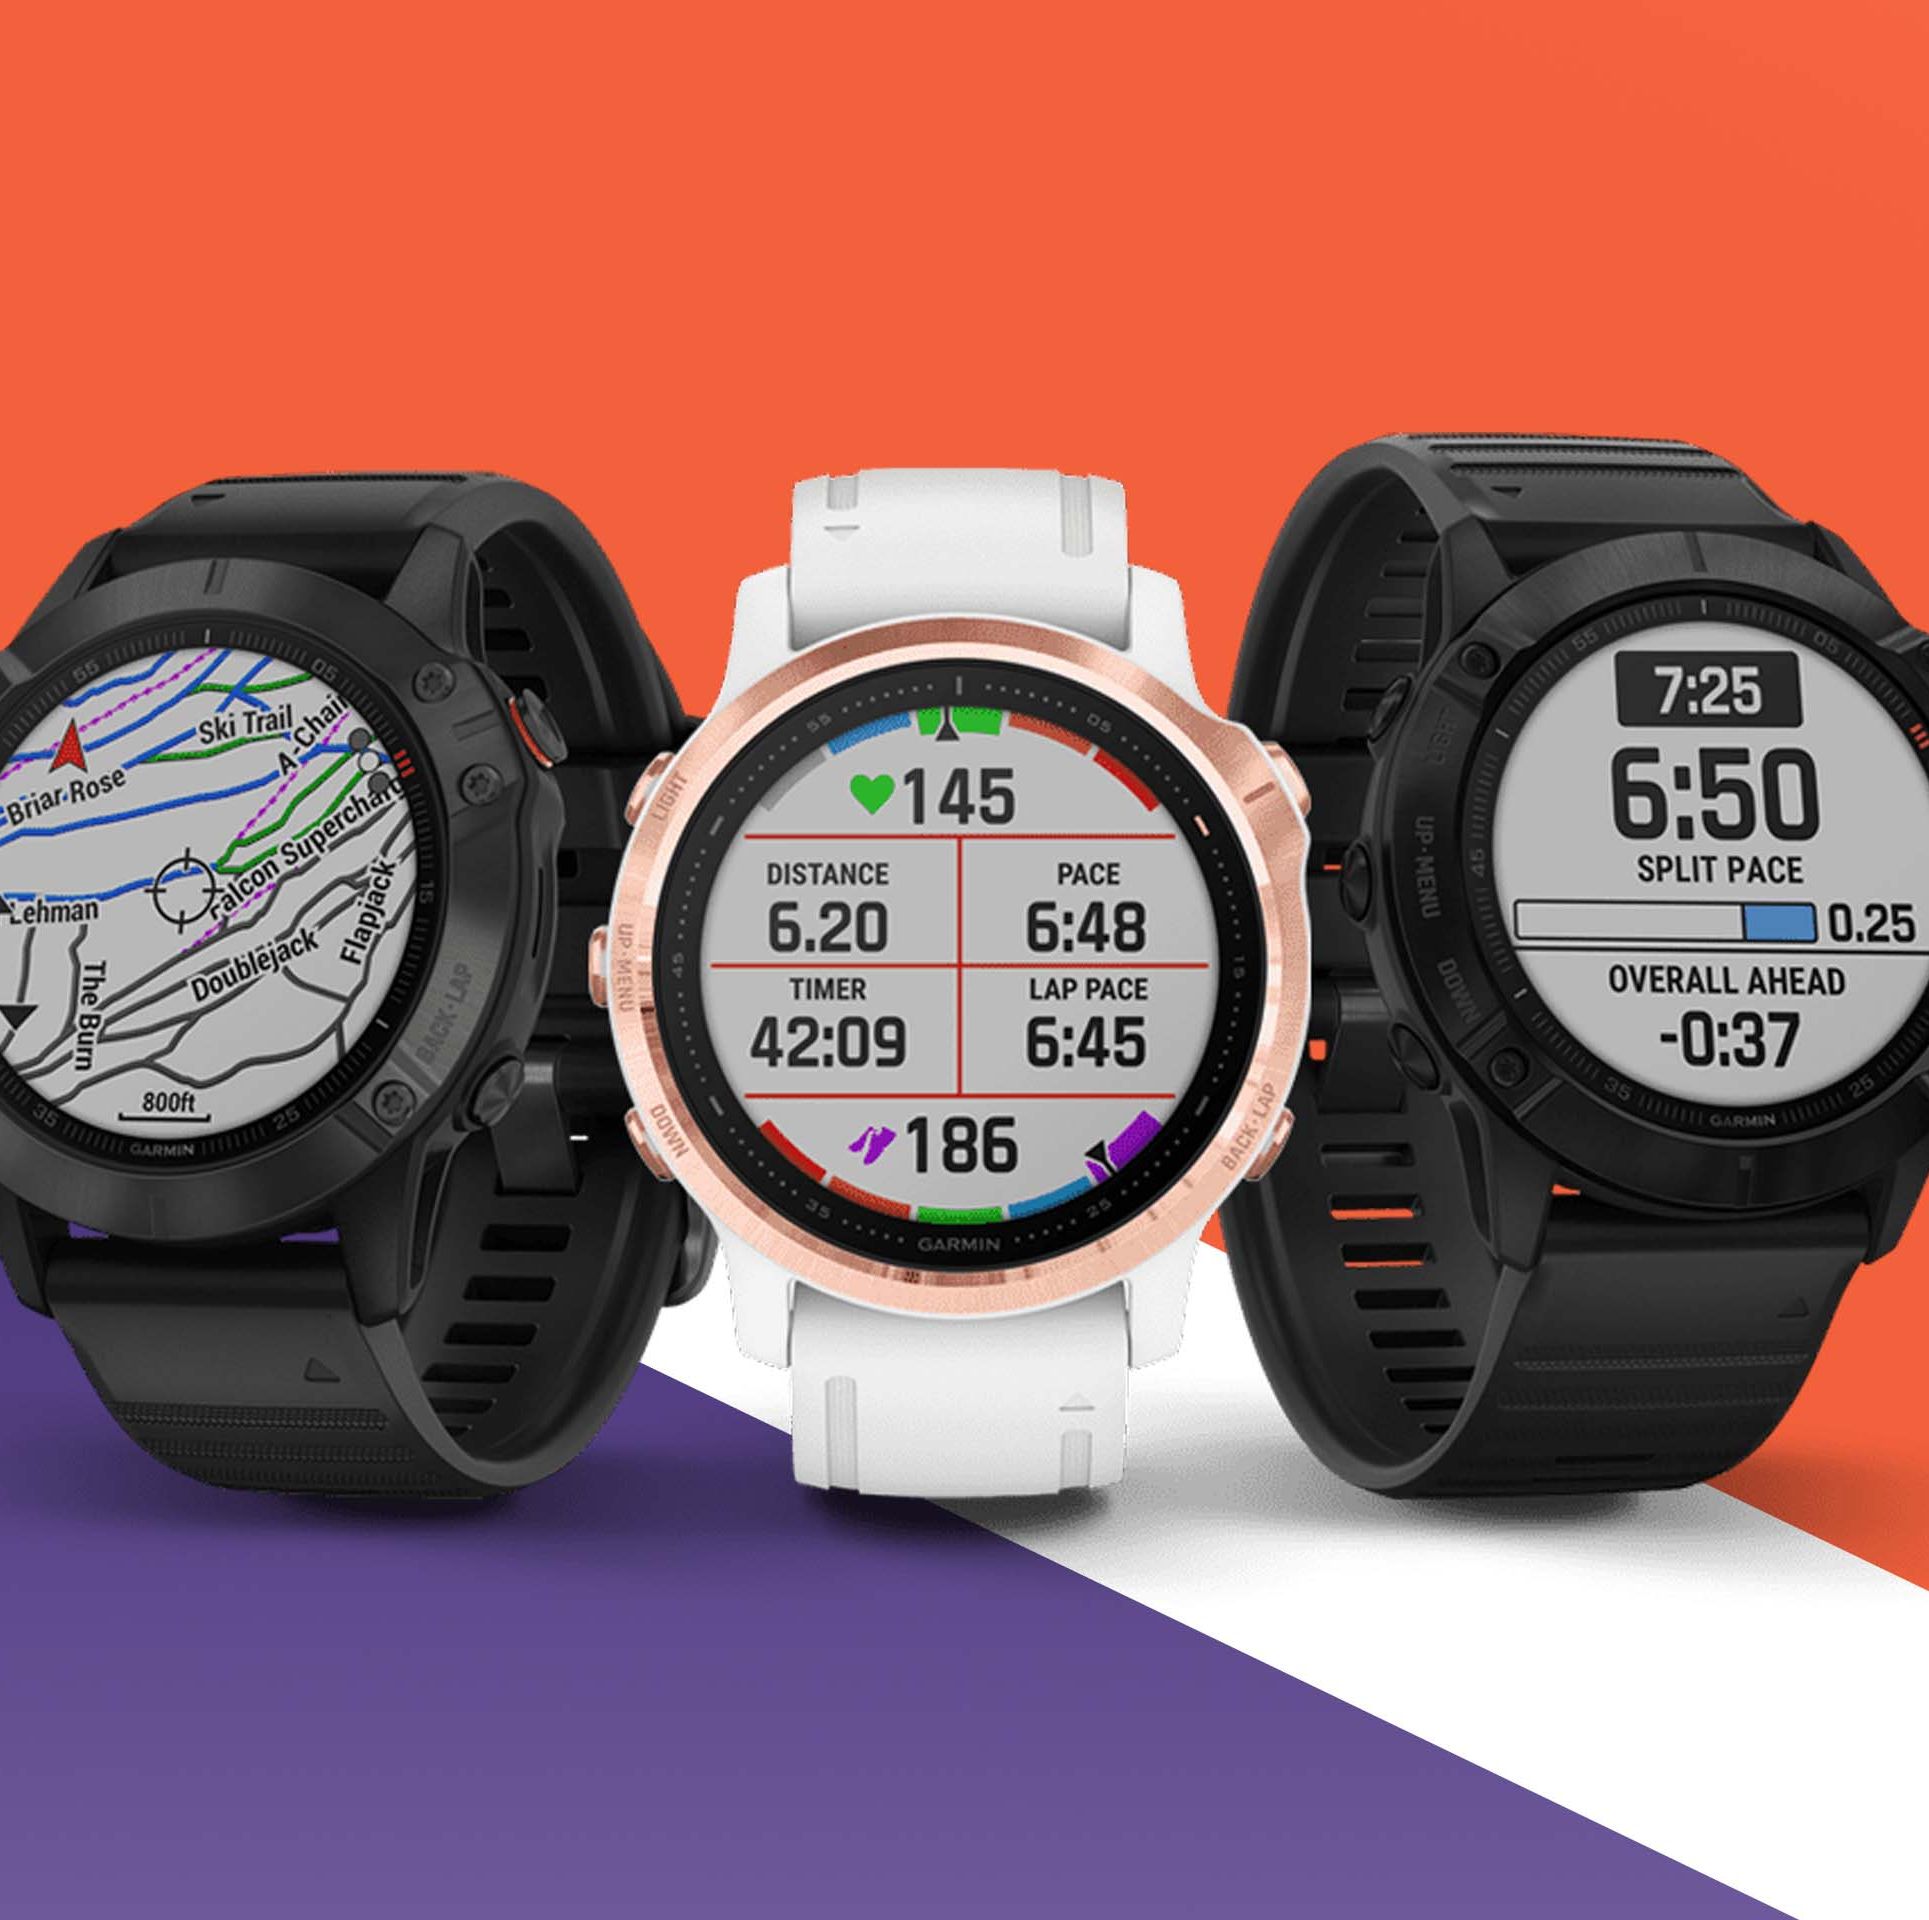 Garmin launch brand new running watches, with solar panels and new